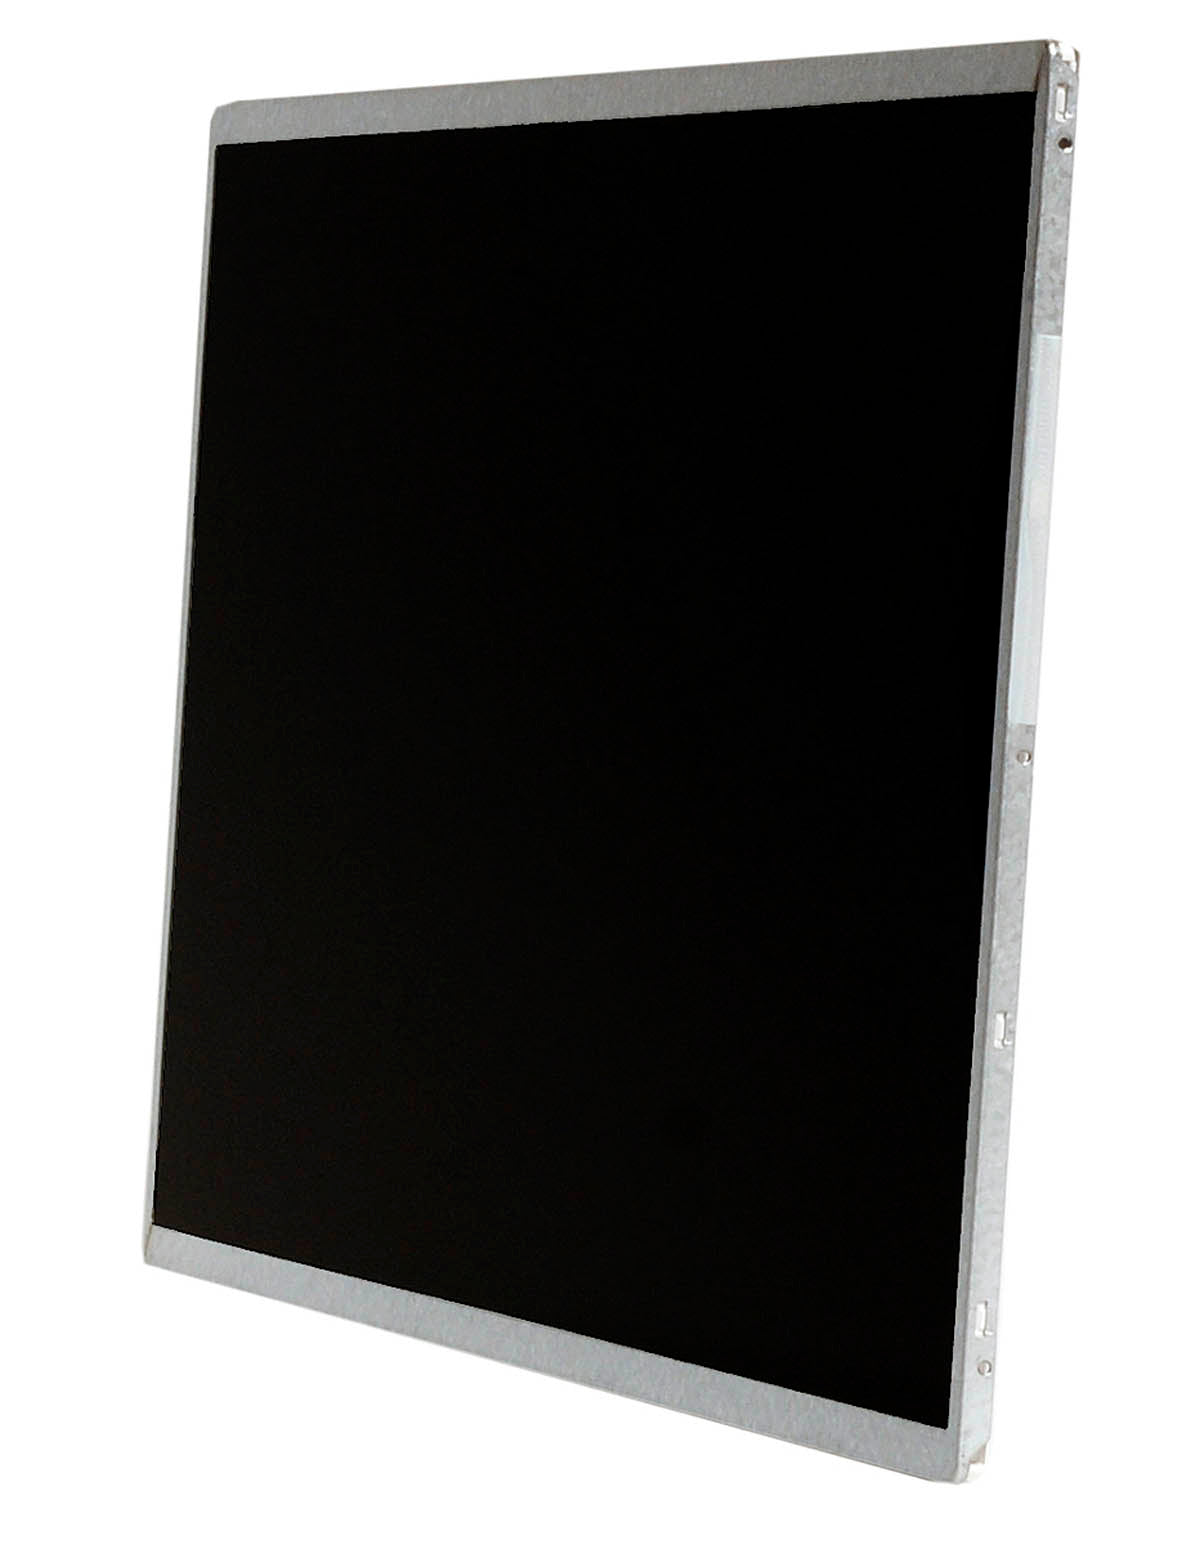 Replacement Screen For LTN140AT04-G01 HD 1366x768 Glossy LCD LED Display